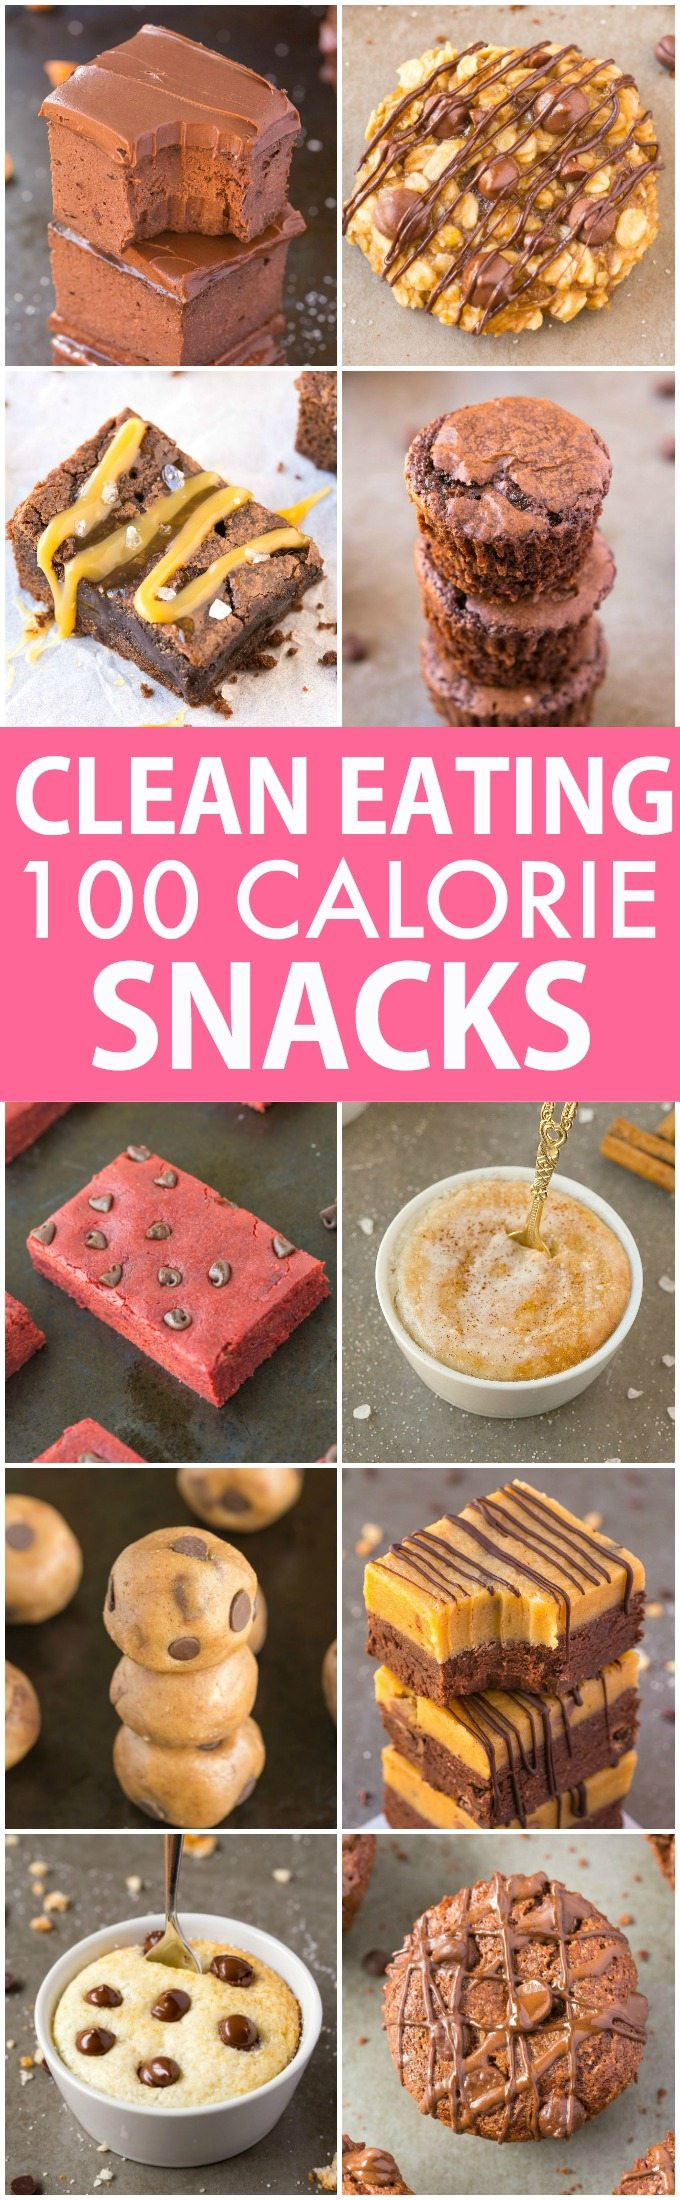 Healthy Candy Snacks
 10 Clean Eating Healthy Sweet Snacks Under 100 Calories